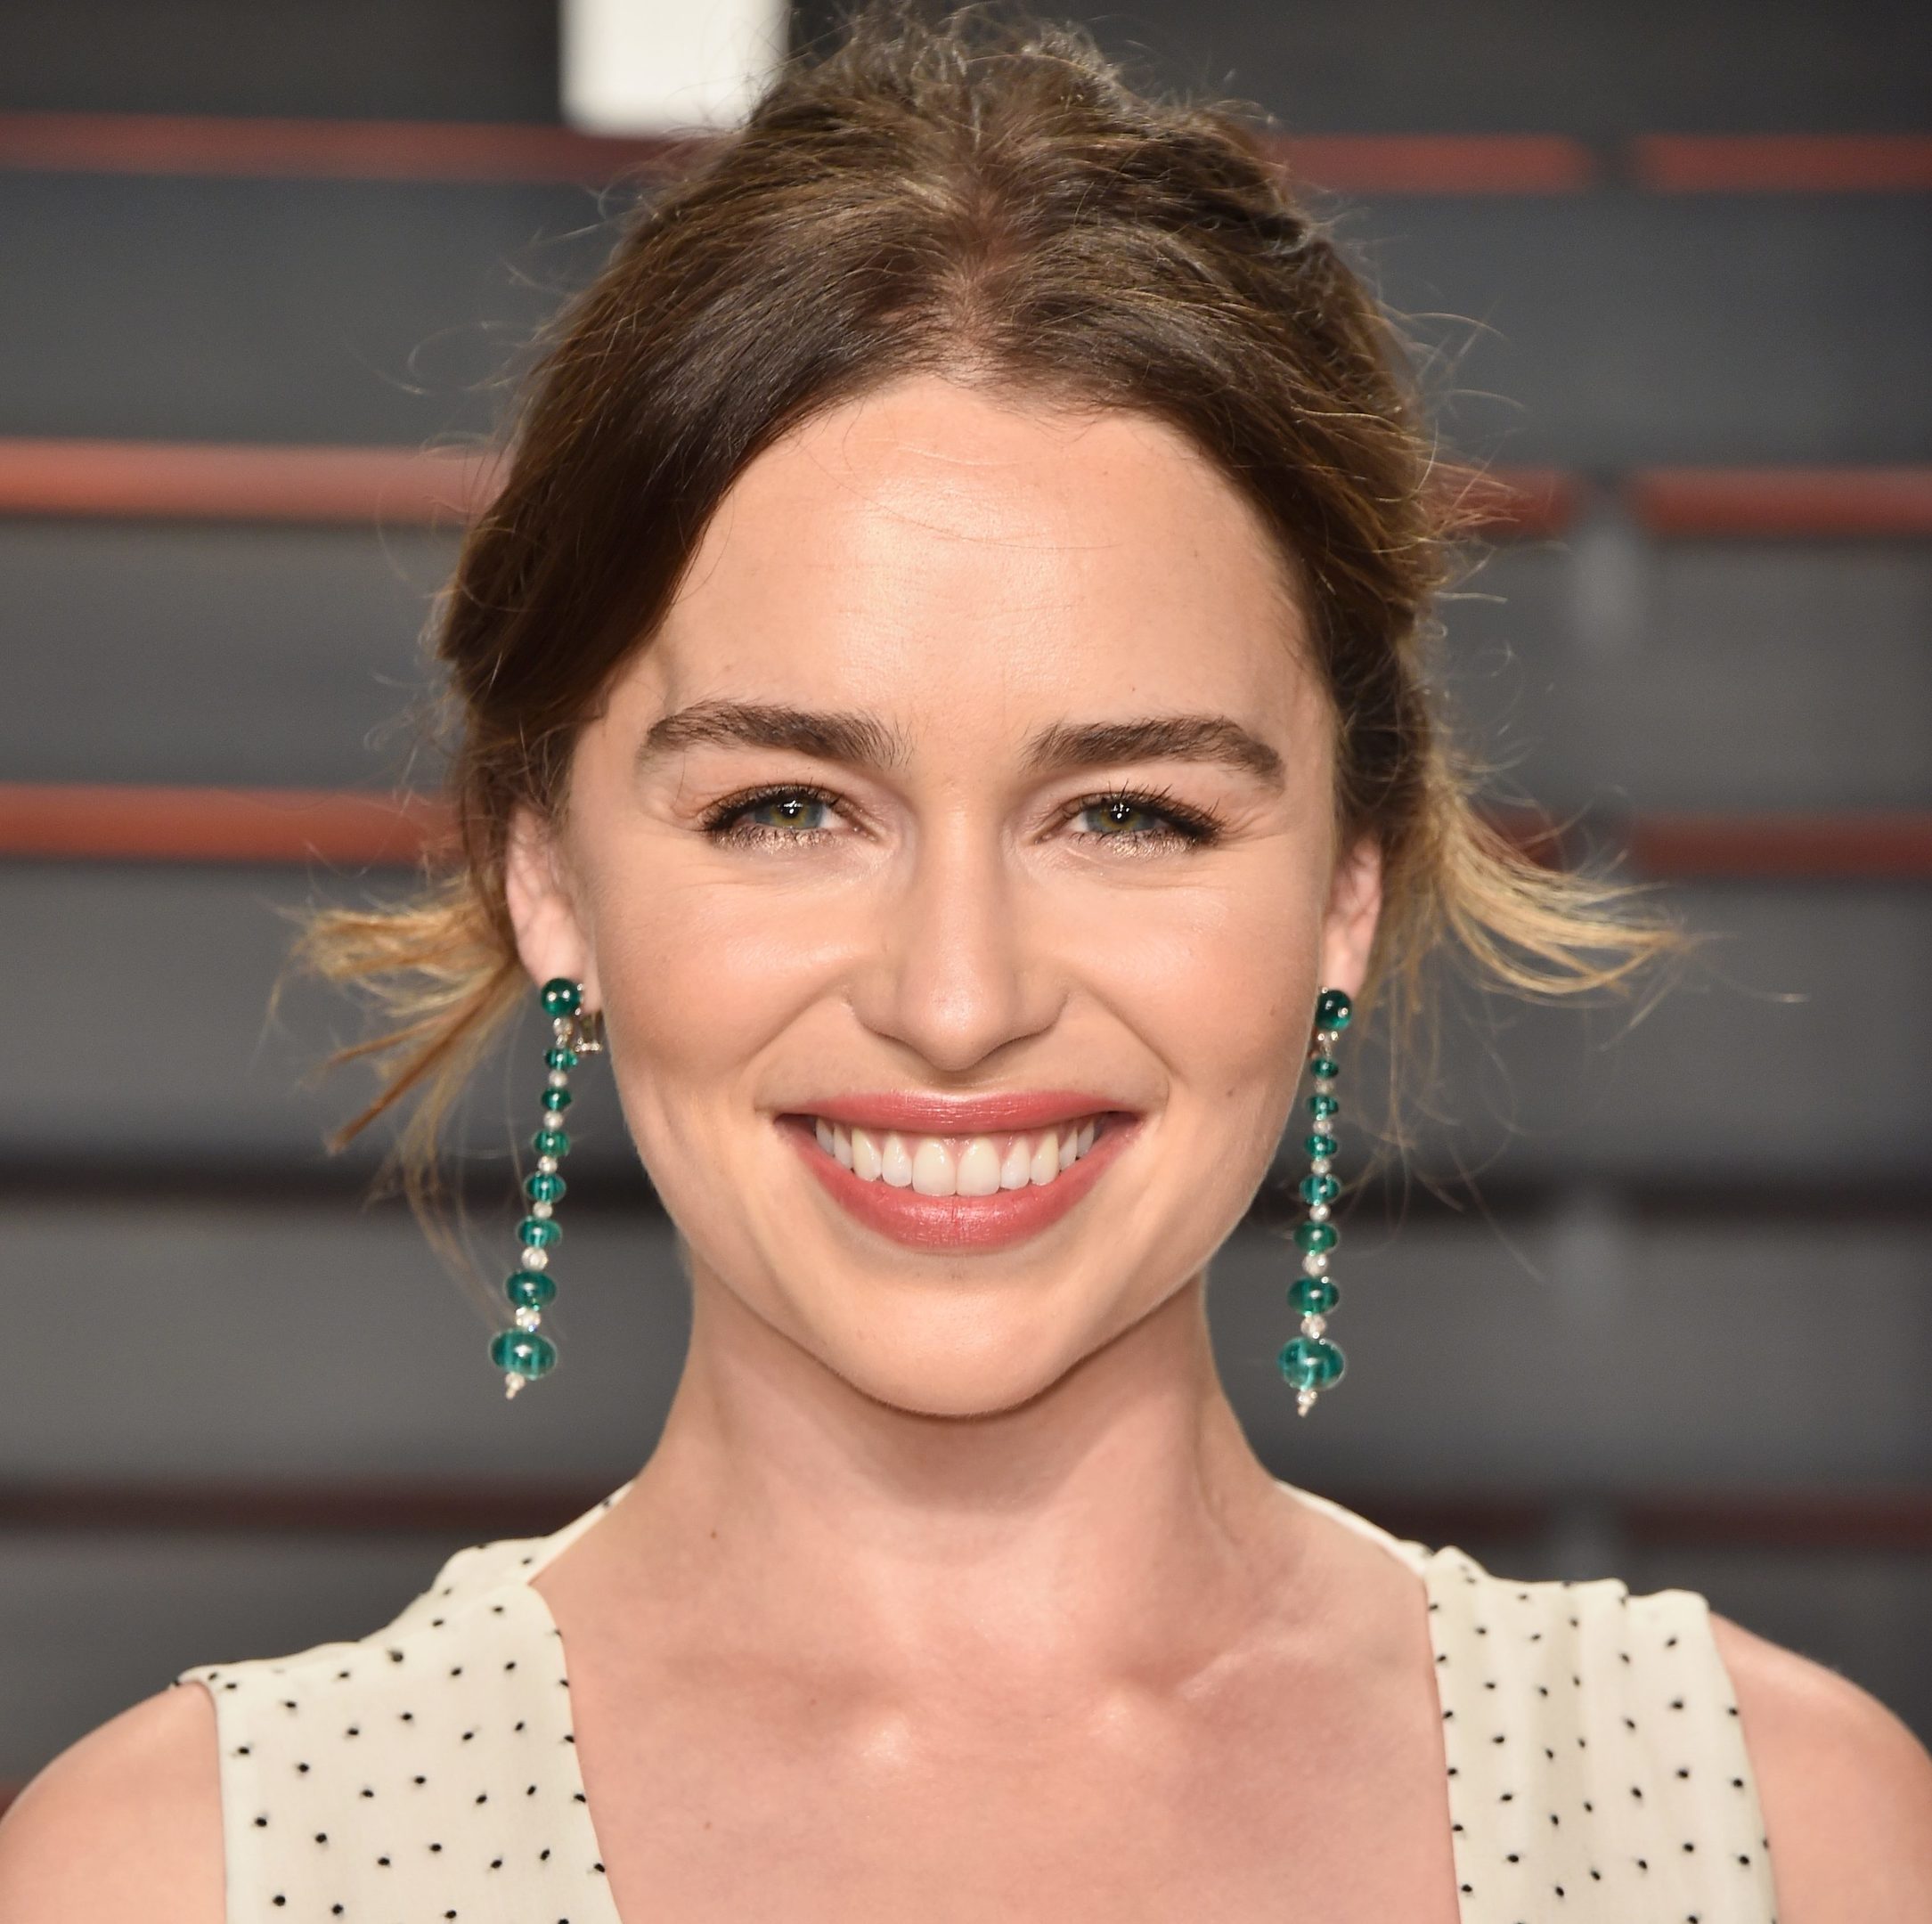 Game of Thrones actress Emilia Clarke (Pascal Le Segretain/Getty Images)